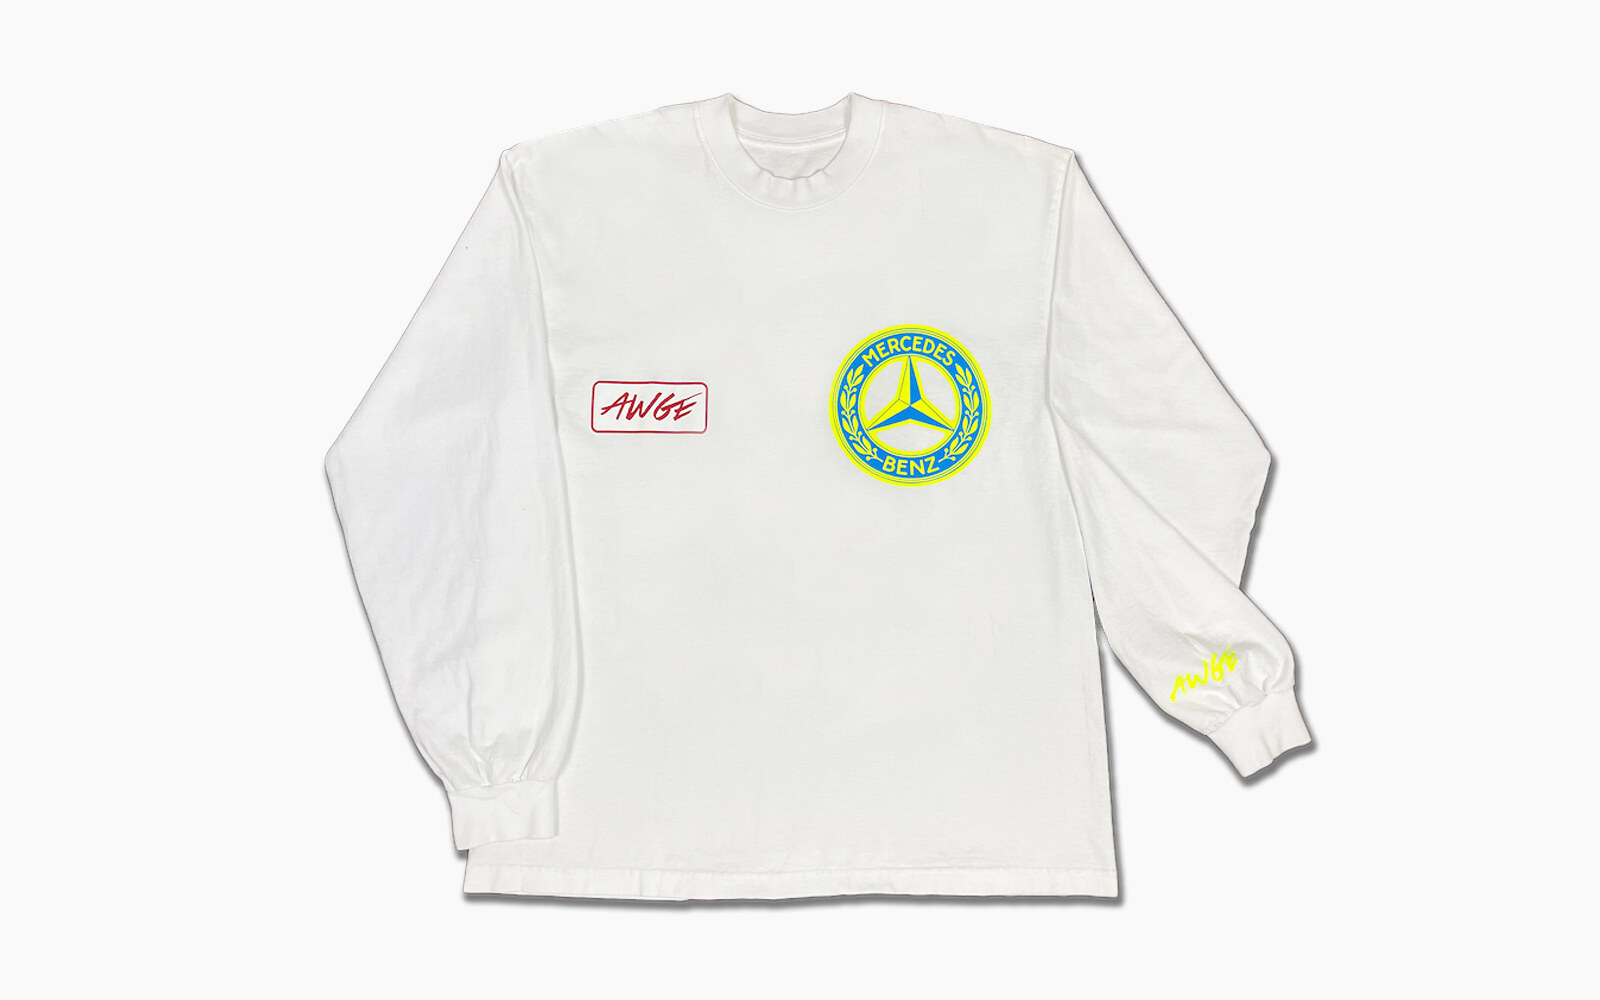 AWGE Mercedes Benz Asap Rocky Capsule Collection